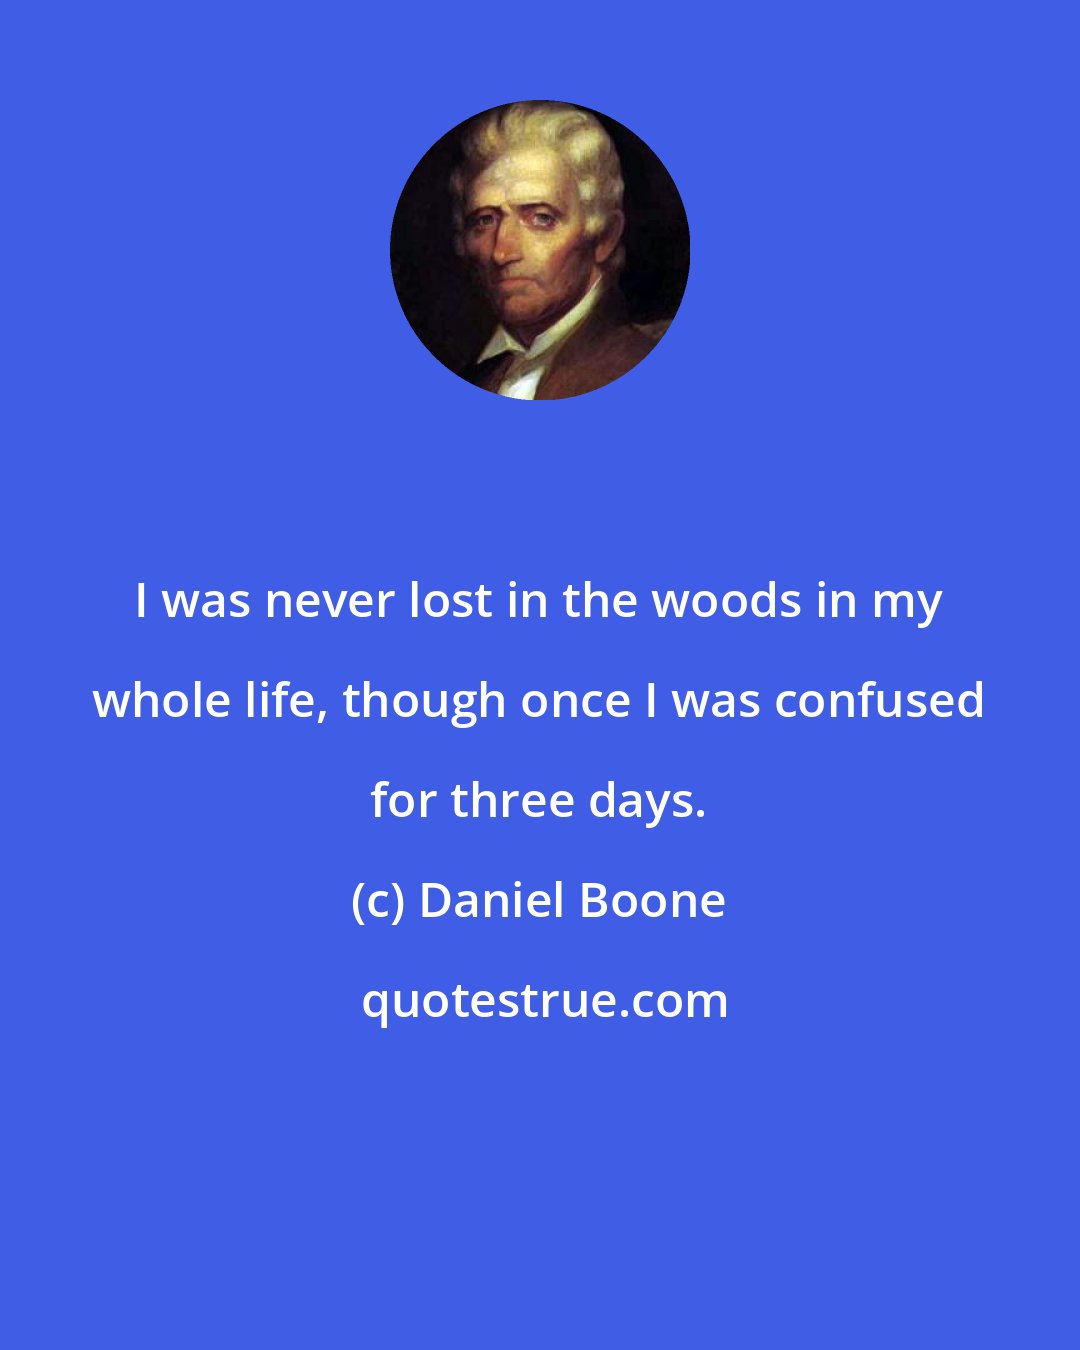 Daniel Boone: I was never lost in the woods in my whole life, though once I was confused for three days.